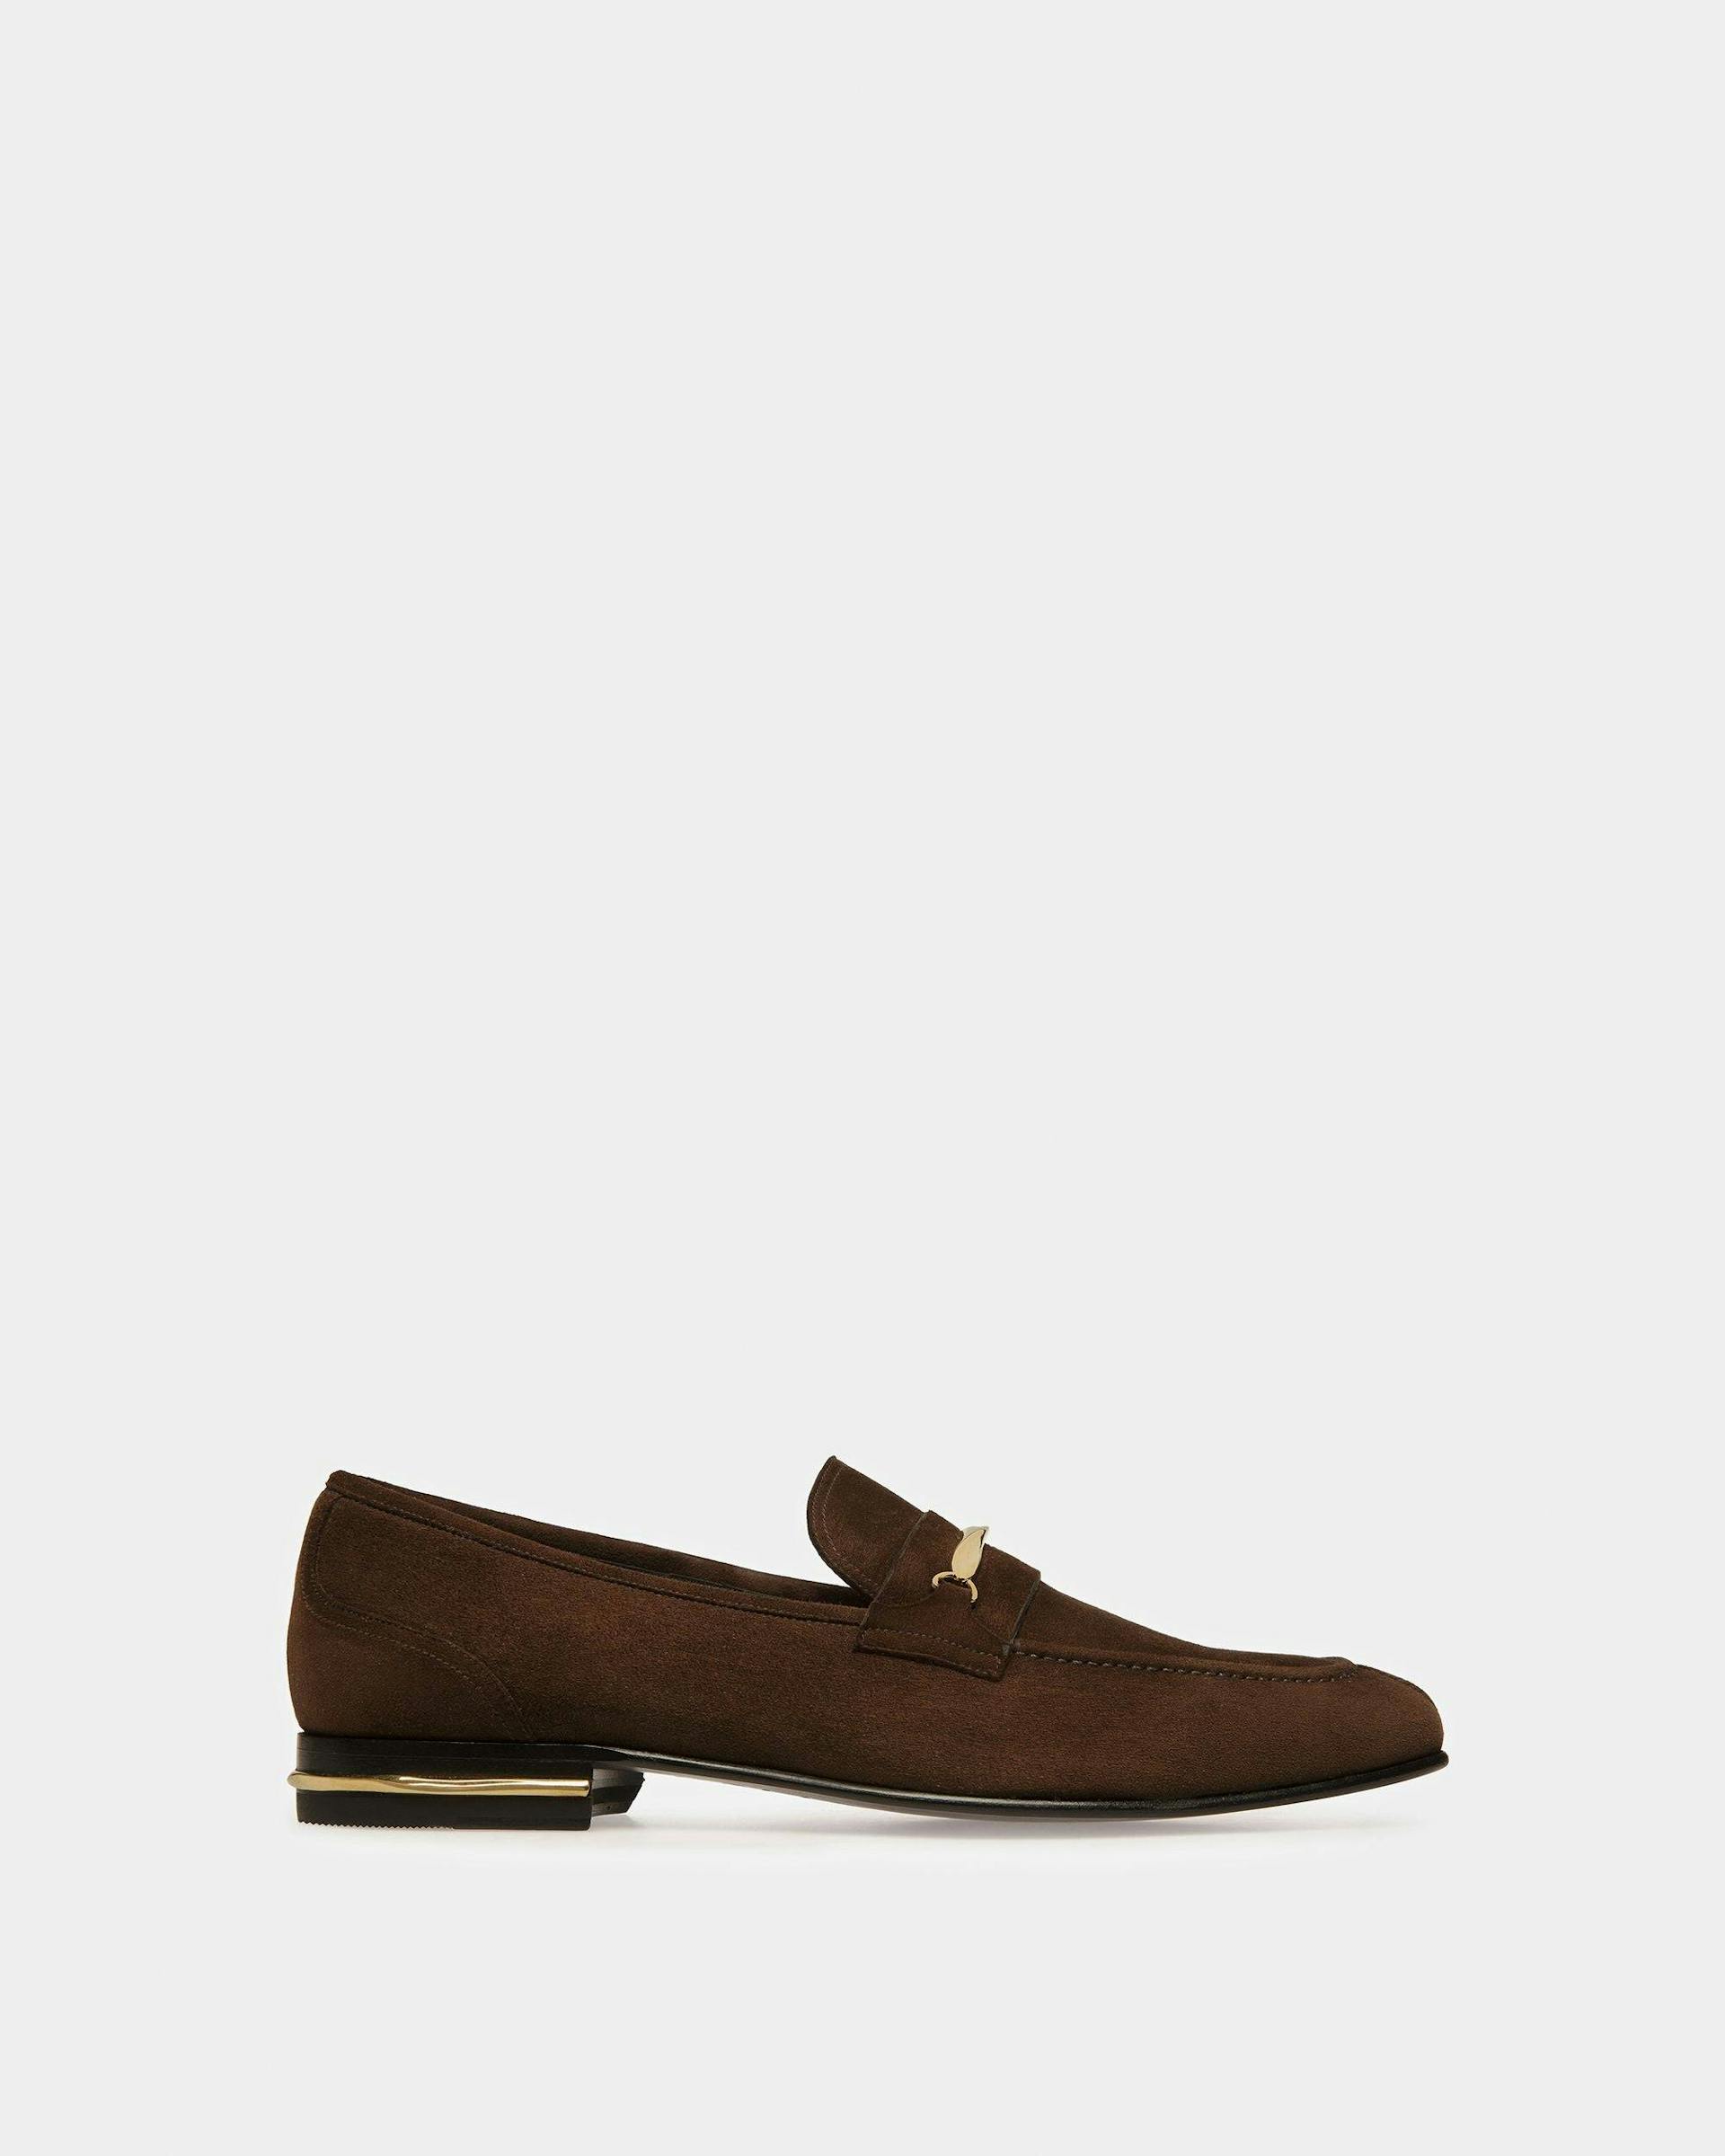 Suisse Loafers - Bally